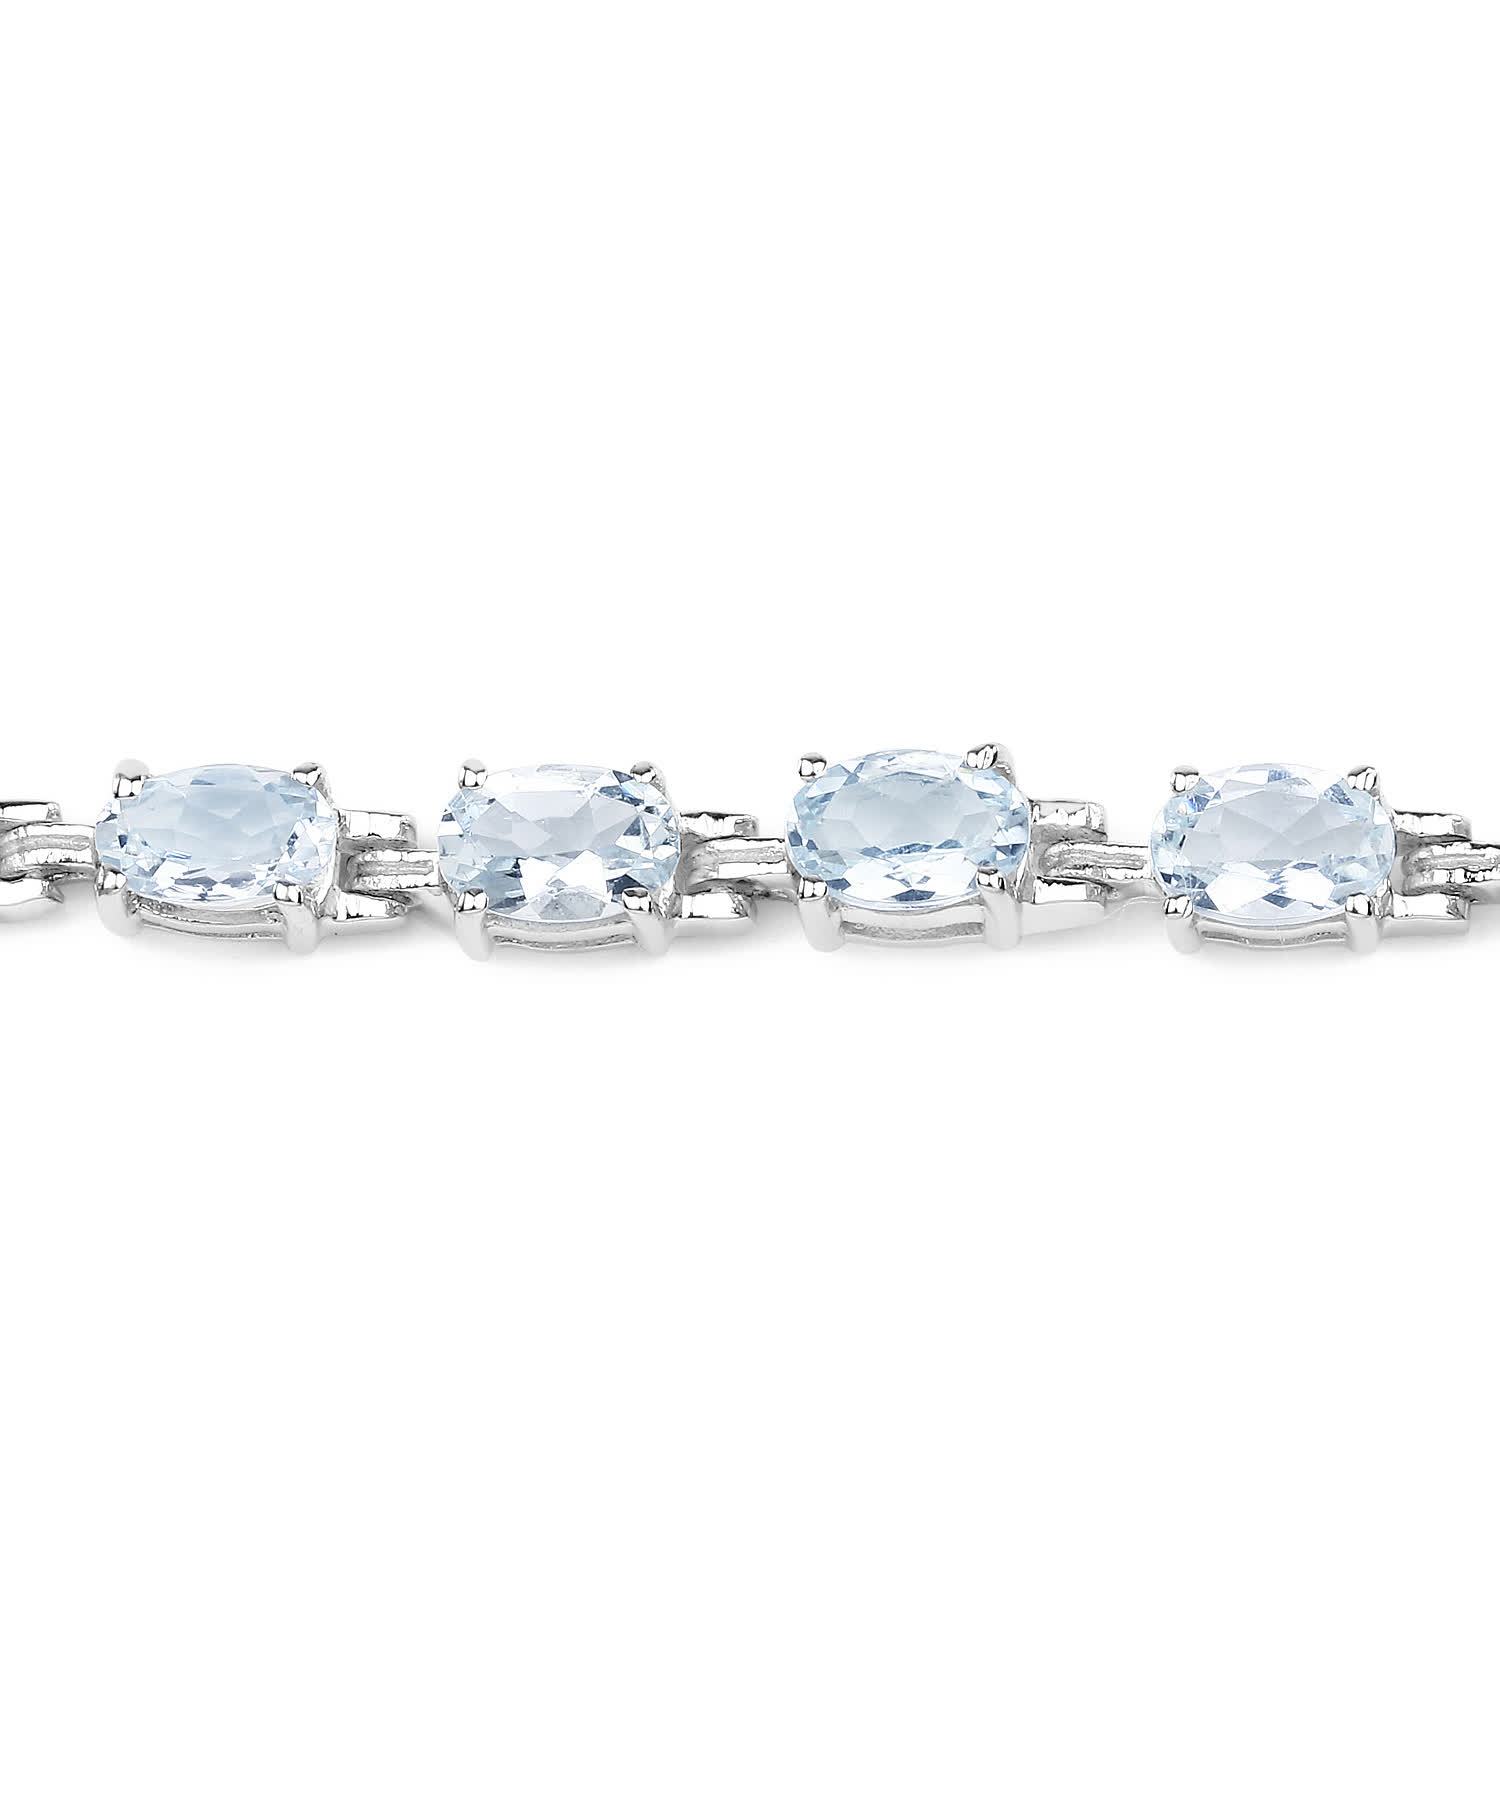 8.80ctw Natural Icy Sky Blue Aquamarine Rhodium Plated 925 Sterling Silver Tennis Bracelet View 3